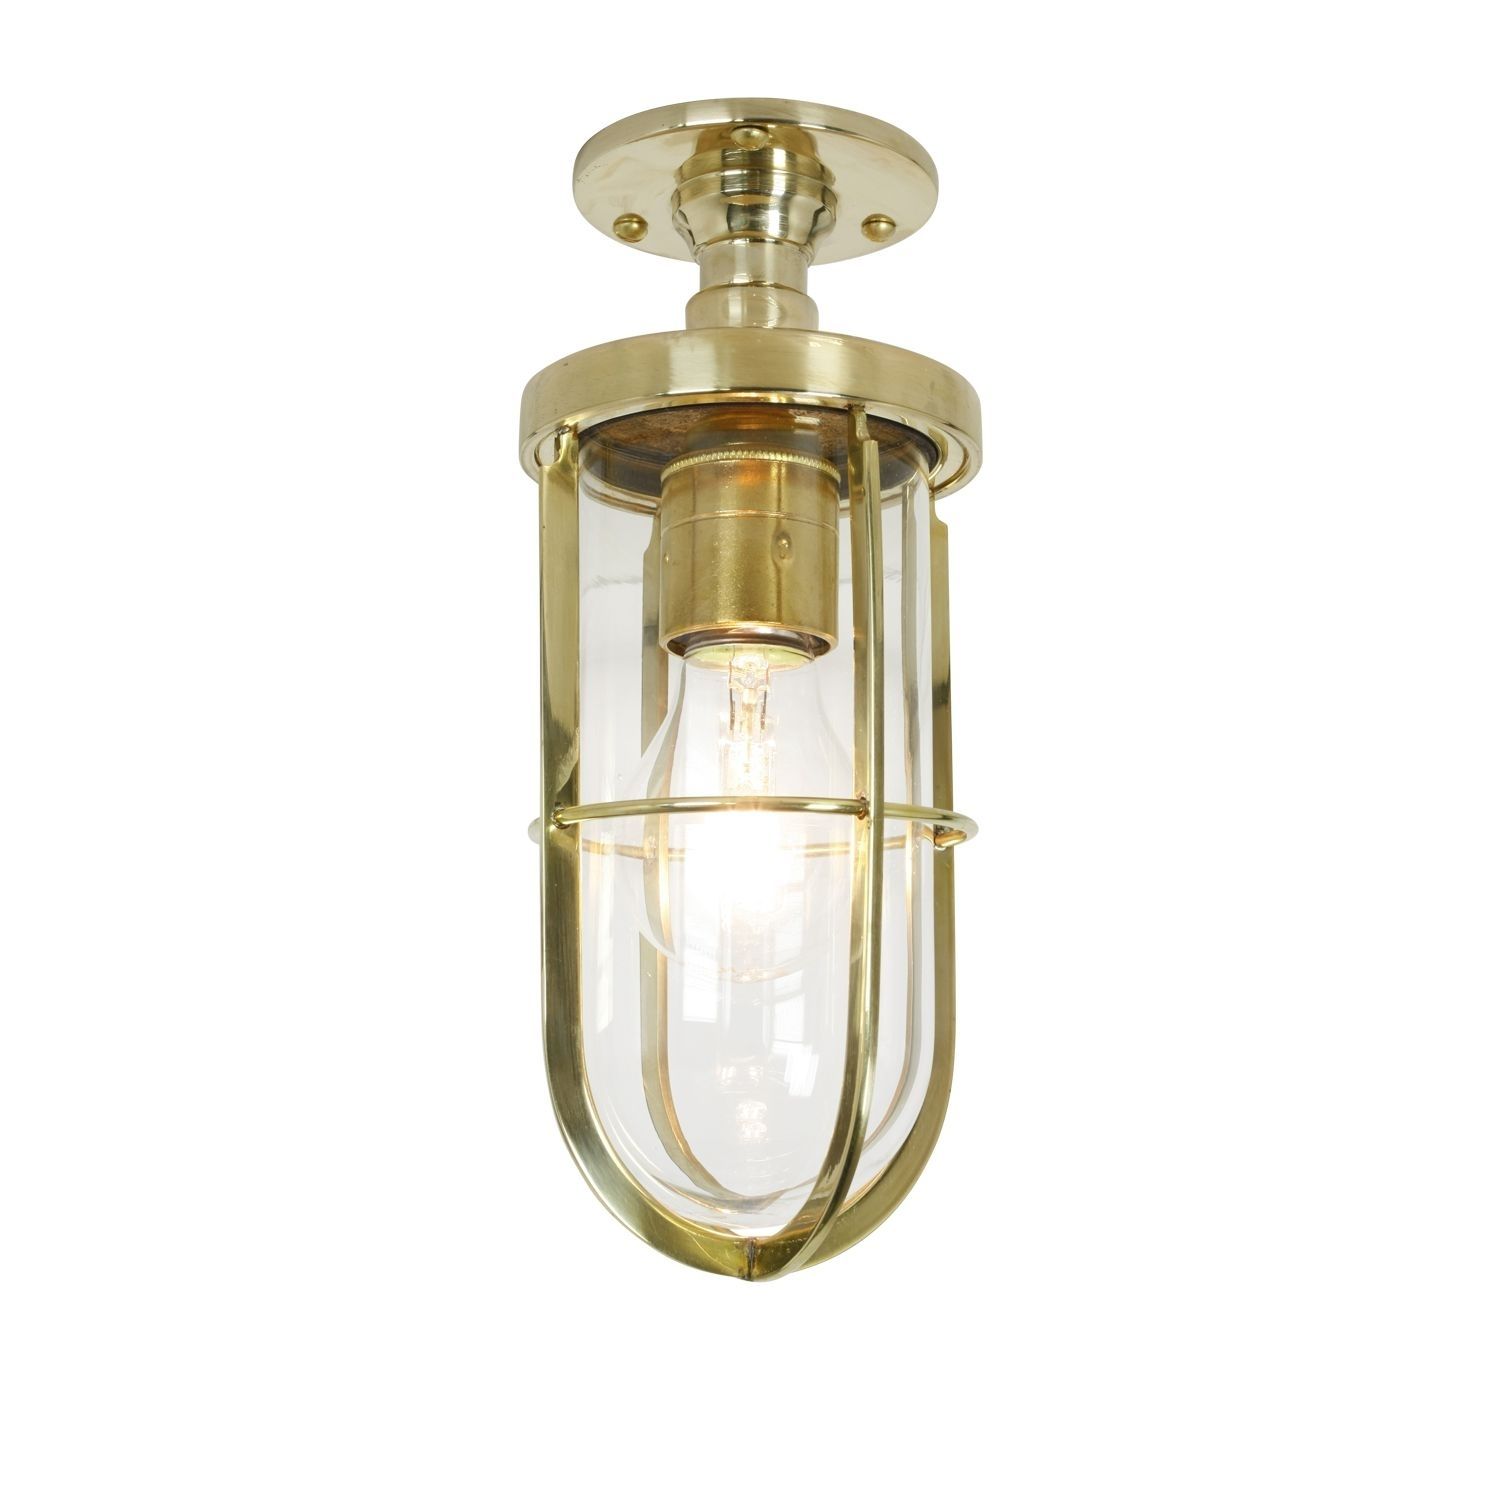 Guarded Ceiling Light Manufactured From Brass. | Interiors Inside Polished Brass Outdoor Ceiling Lights (Photo 8 of 15)